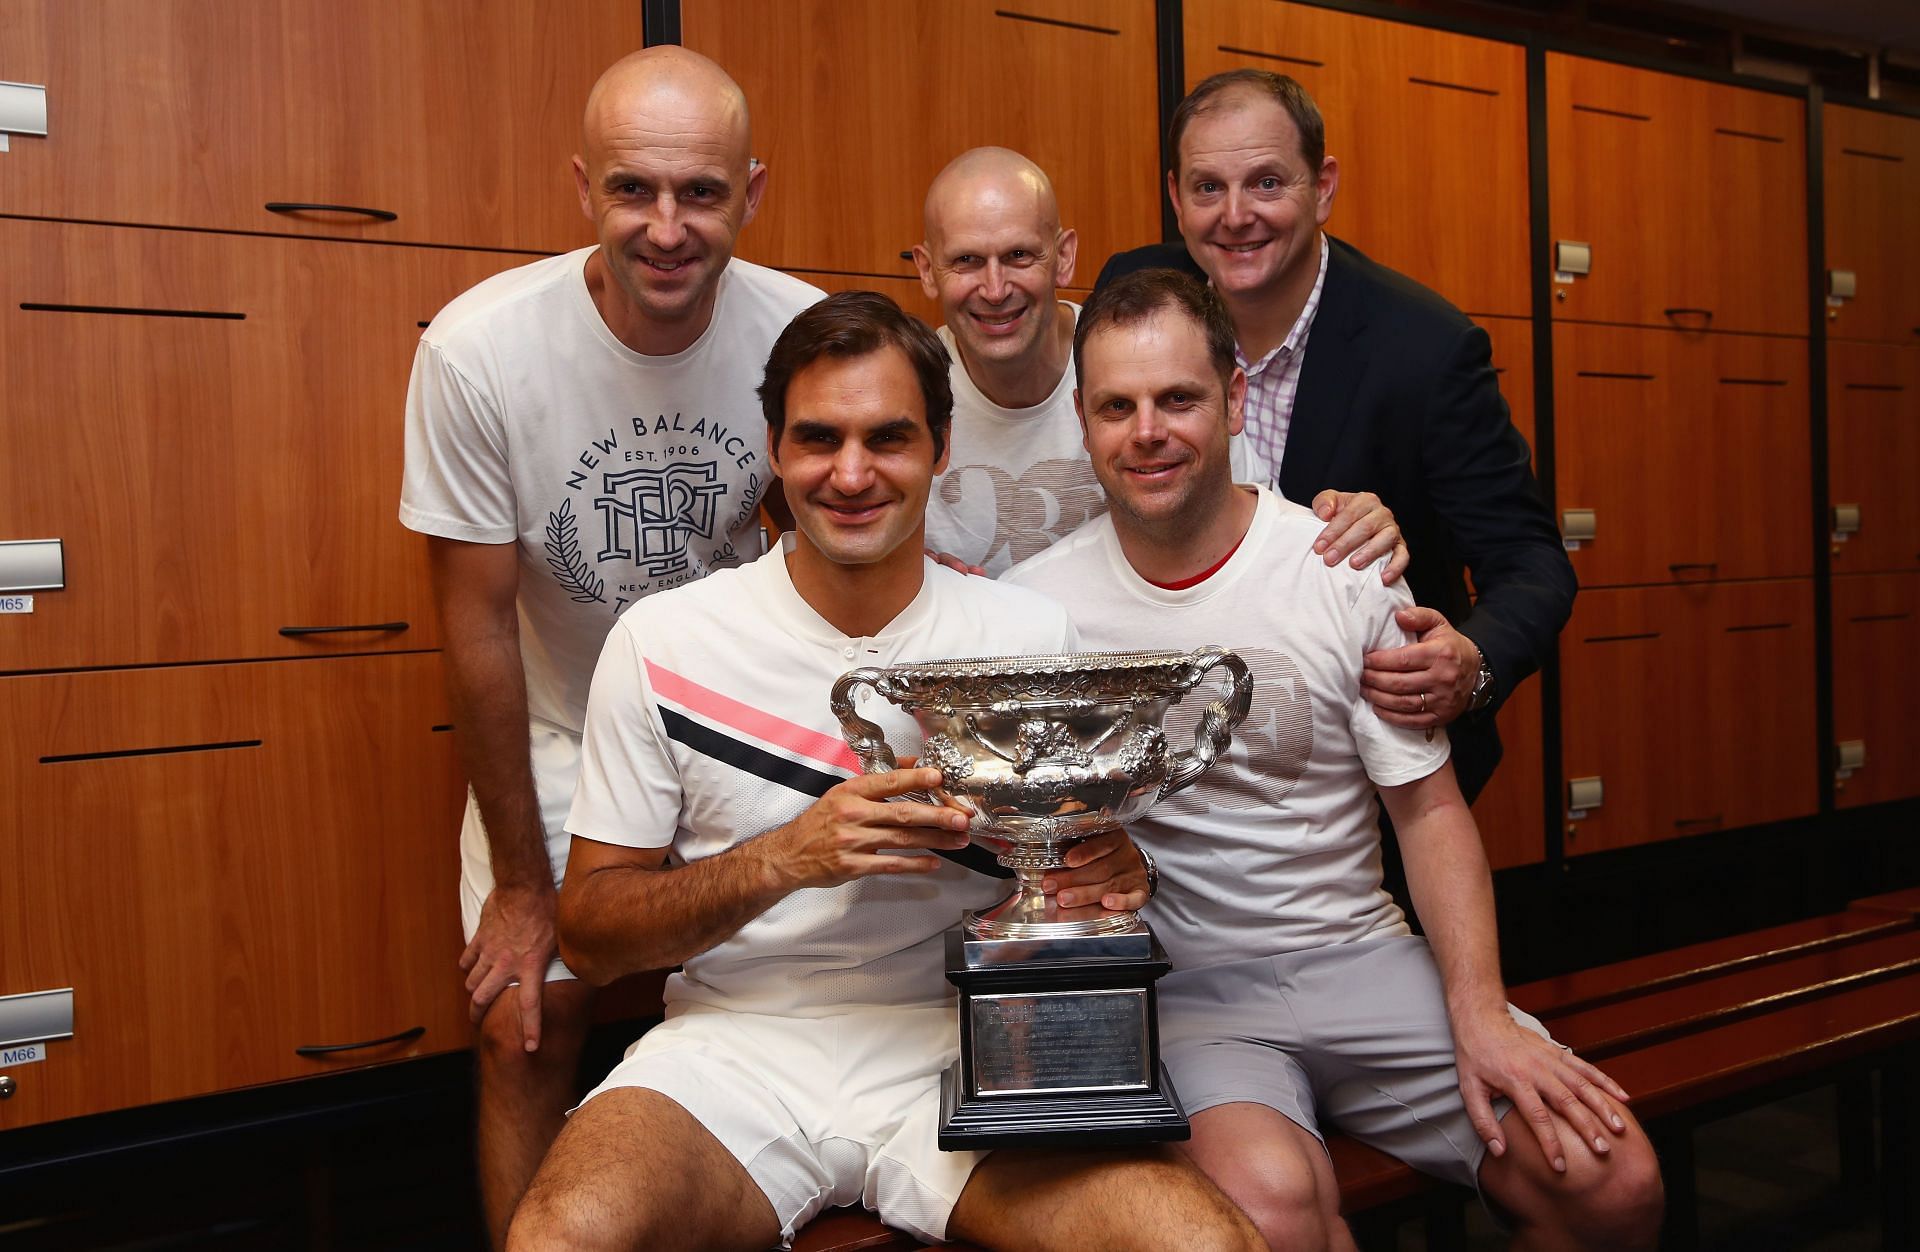 Roger Federer with Tony Godsick (far right) and the rest of his team after his 20th Major title